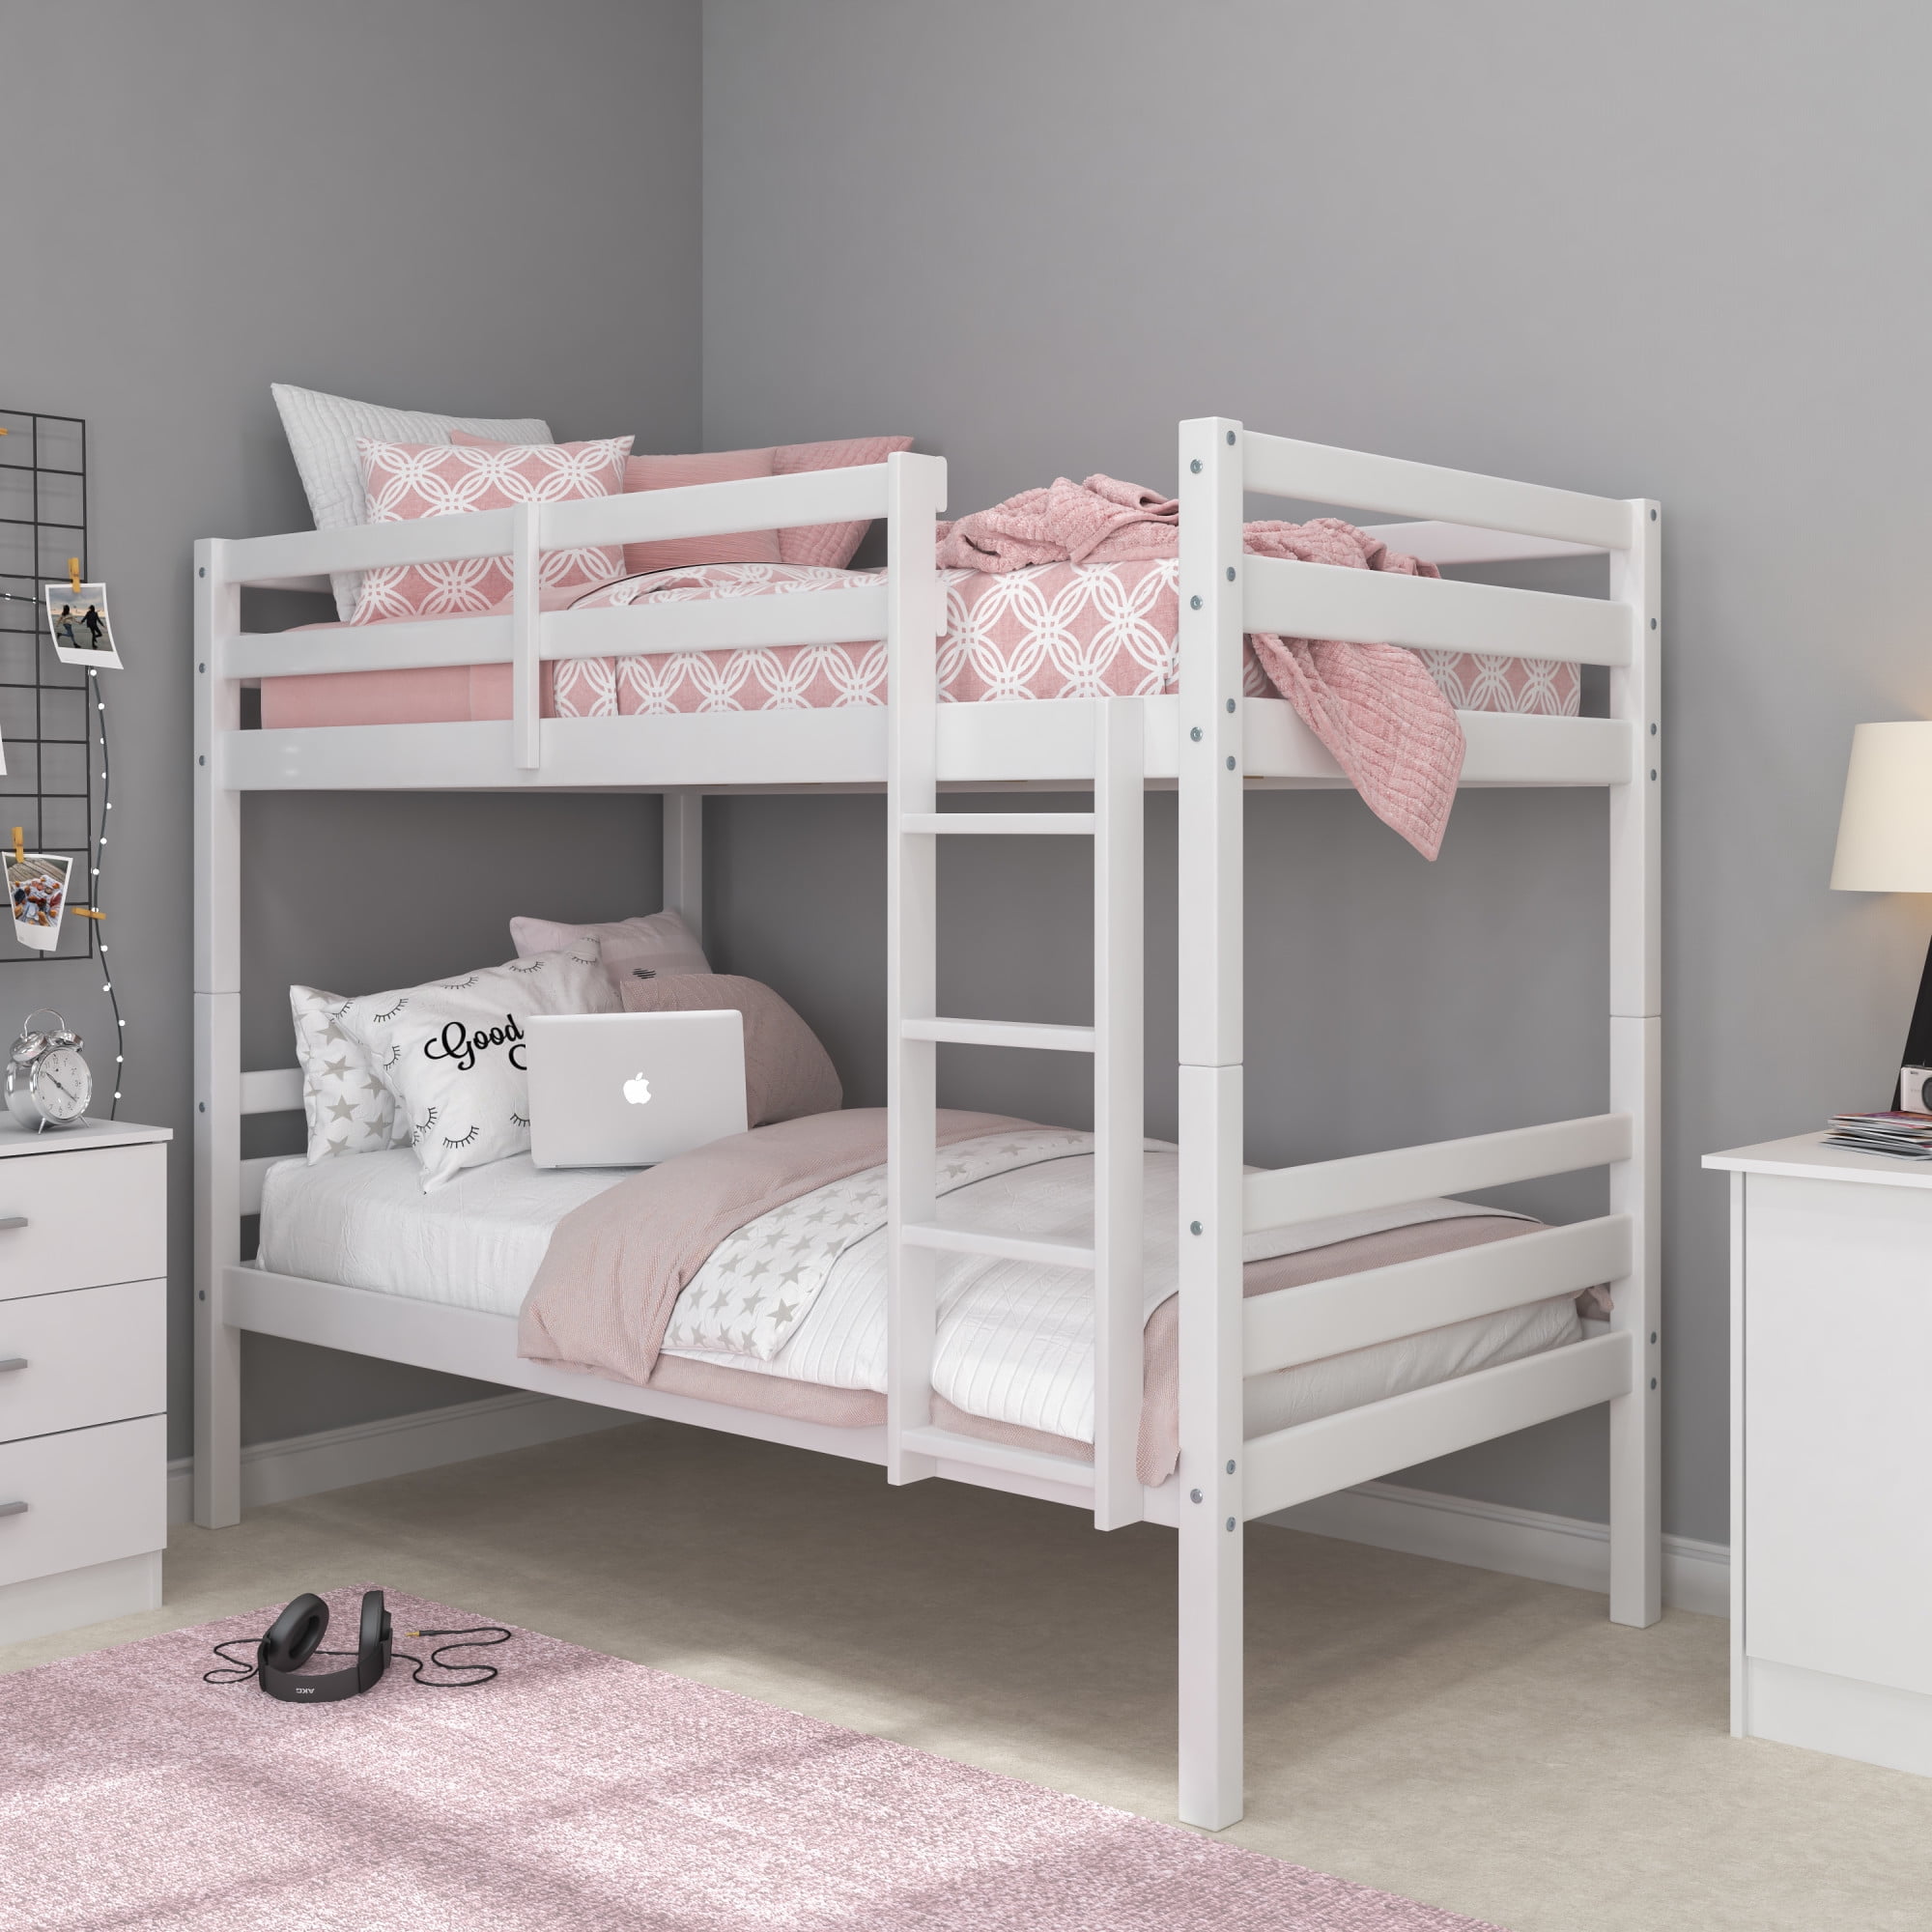 Campbell Wood Twin Over Bunk Bed, Abby Twin Over Twin Bunk Bed